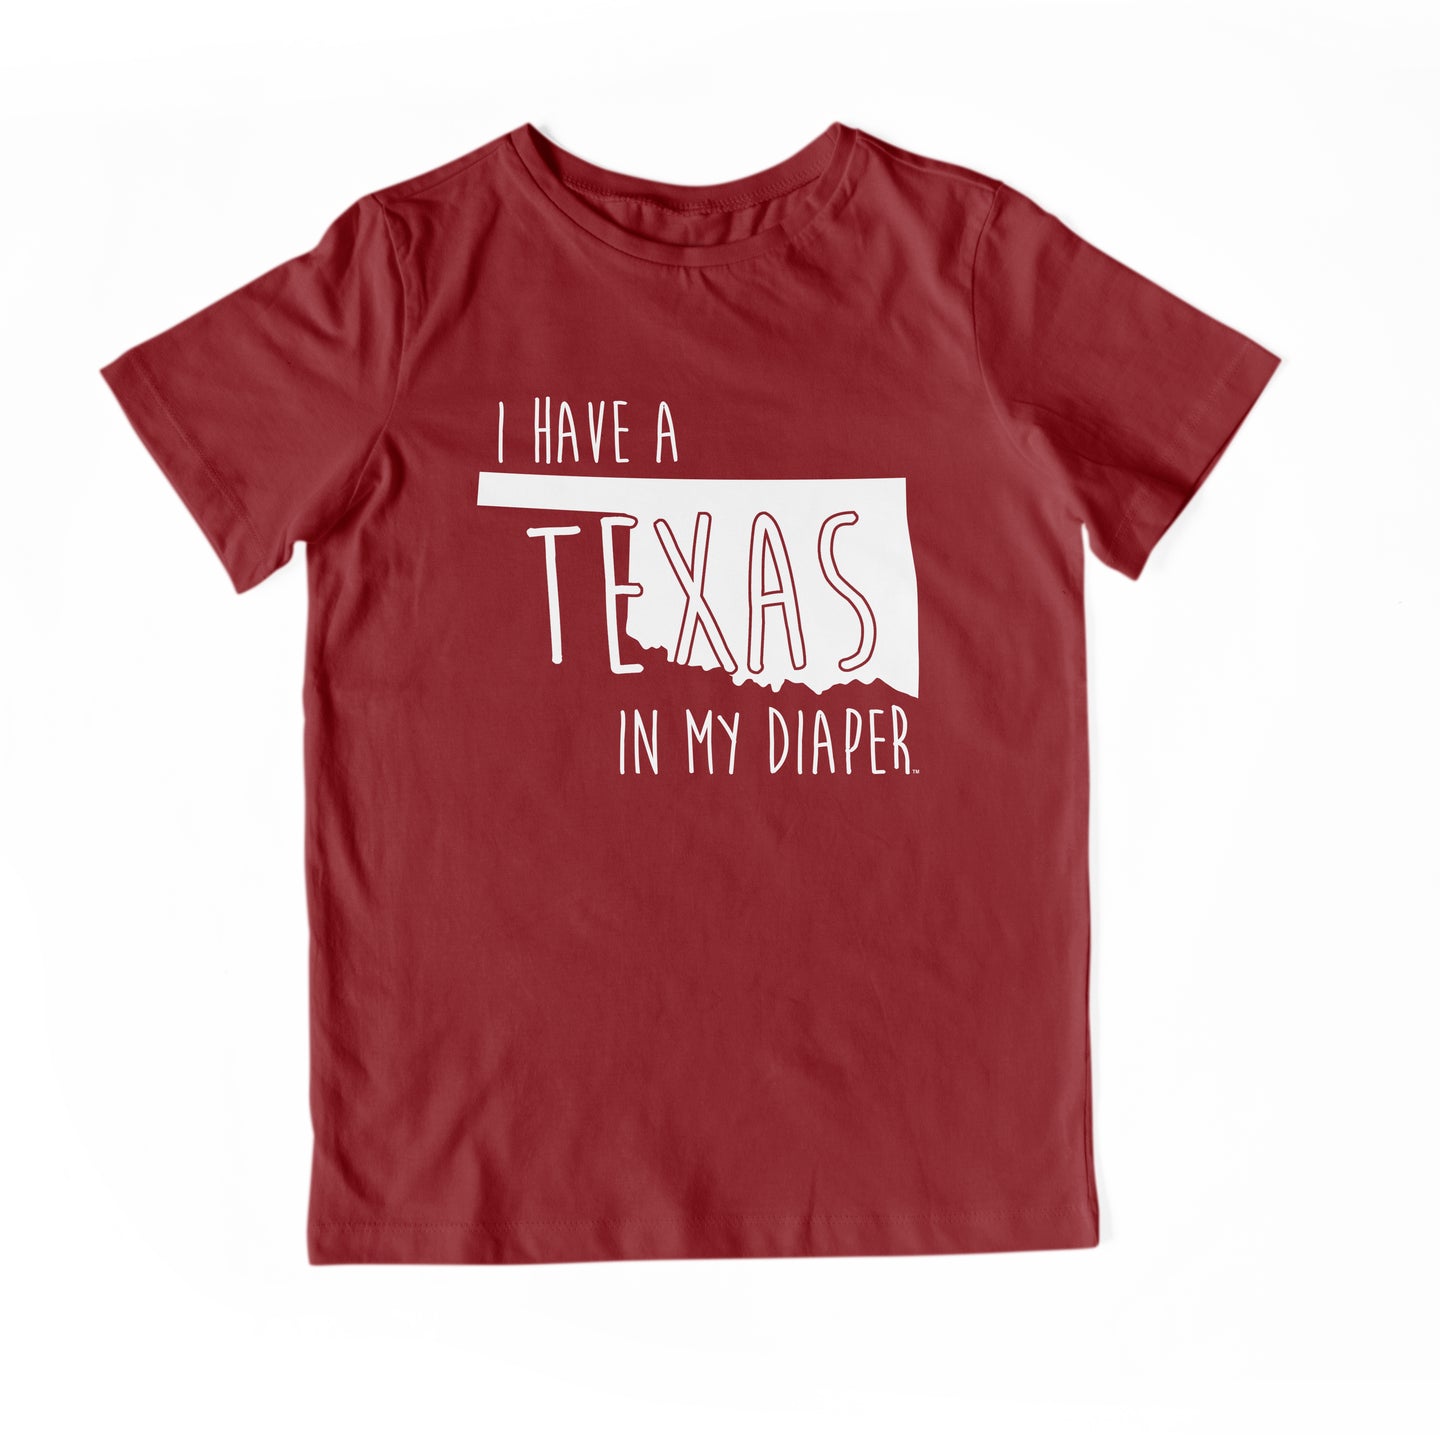 I HAVE A TEXAS IN MY DIAPER Child Tee